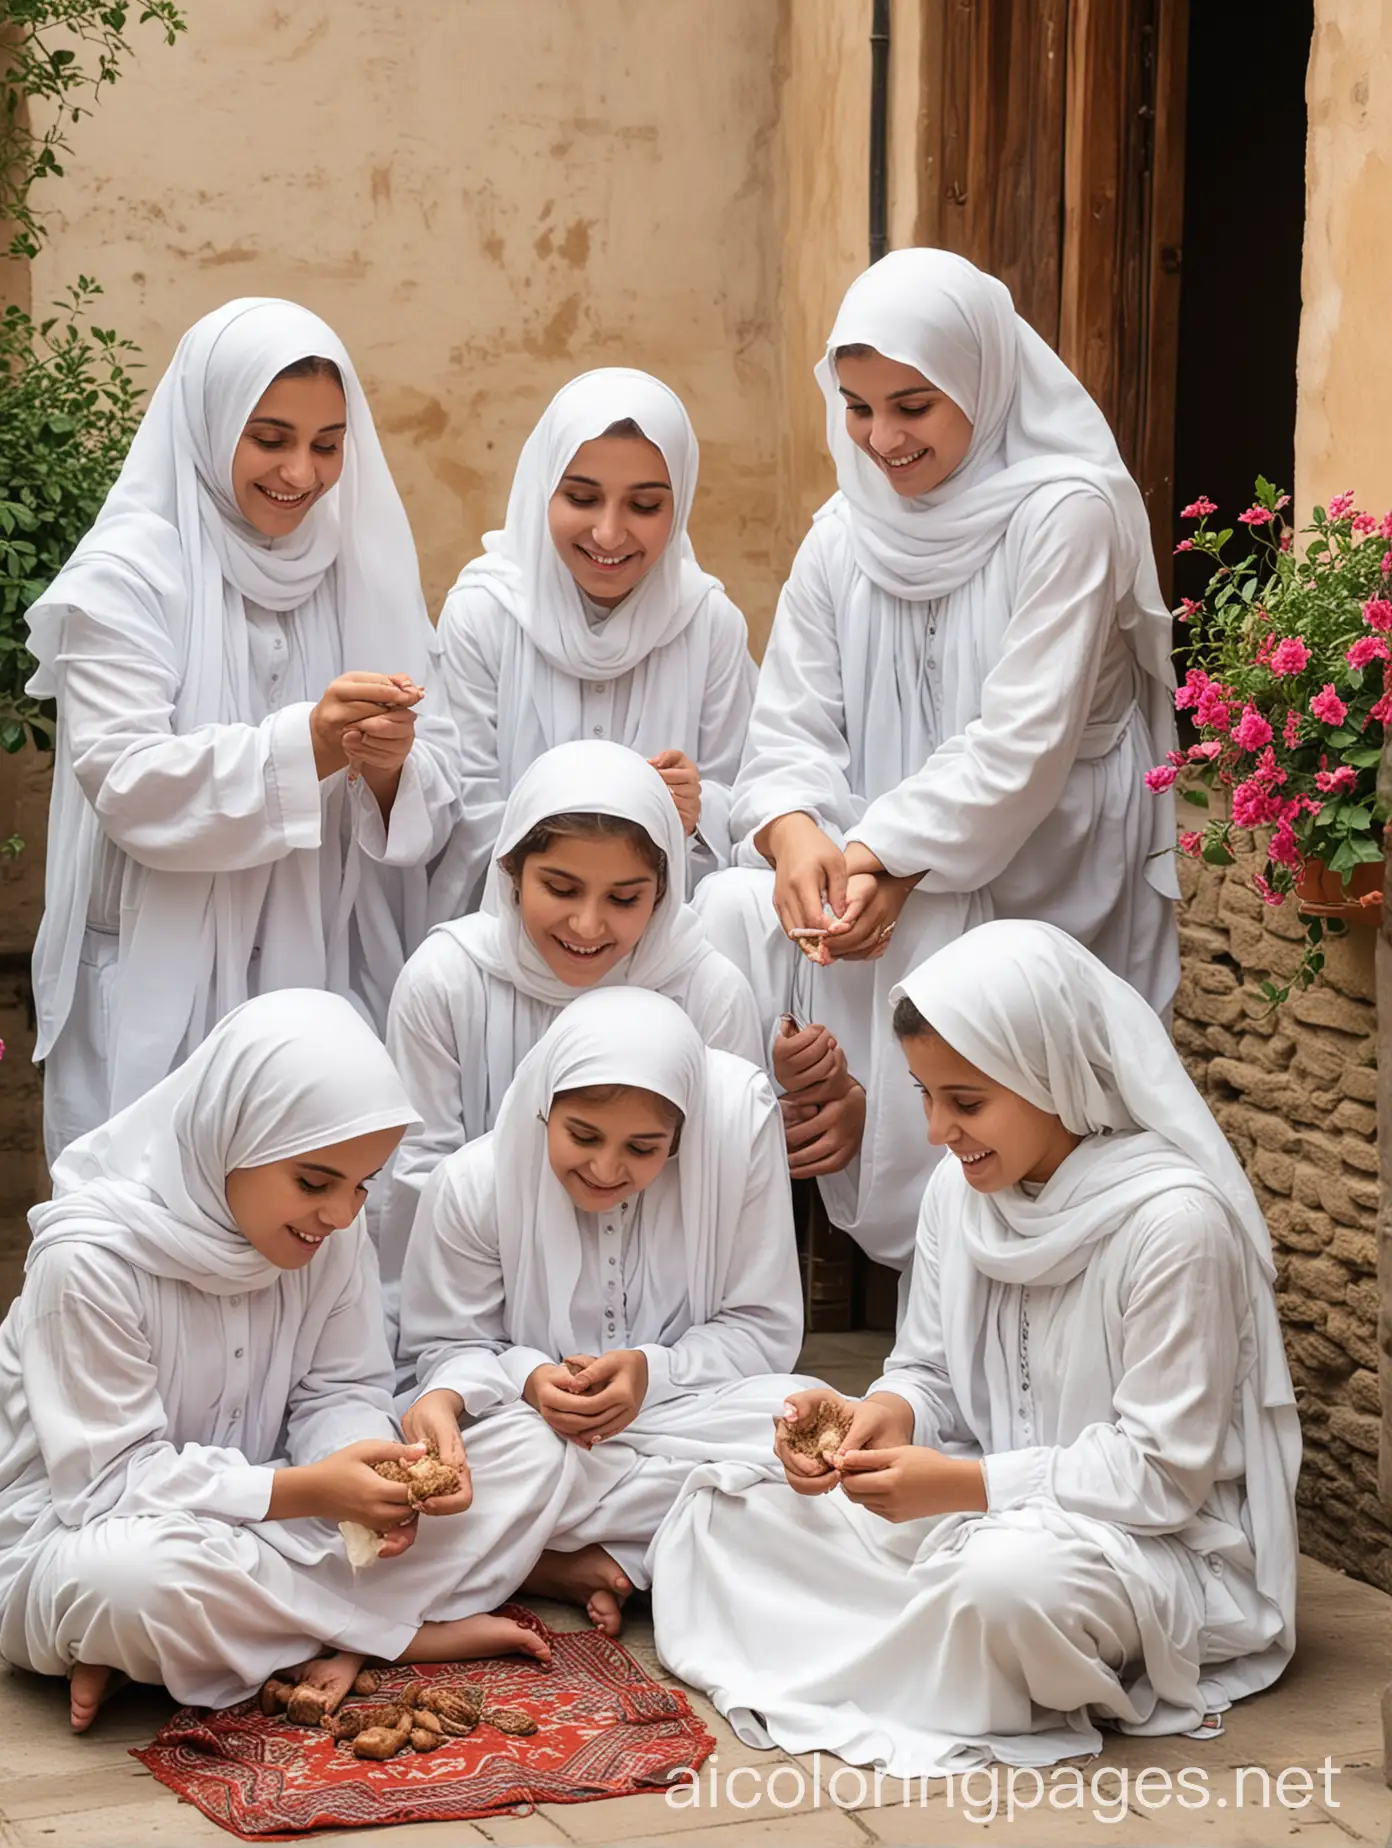 The picture depicts a group of veiled girls sitting in the courtyard of a house on Eid day. The atmosphere is full of happiness and joy as they clean the lamb and cut the meat. They seem to be working together in harmony and cooperation, surrounded by the spirit of the holiday and its warm atmosphere. The background may be full of decorations that express the joy of celebration, and the bright colors reflect the general joy of this special day. , Coloring Page, black and white, line art, white background, Simplicity, Ample White Space. The background of the coloring page is plain white to make it easy for young children to color within the lines. The outlines of all the subjects are easy to distinguish, making it simple for kids to color without too much difficulty